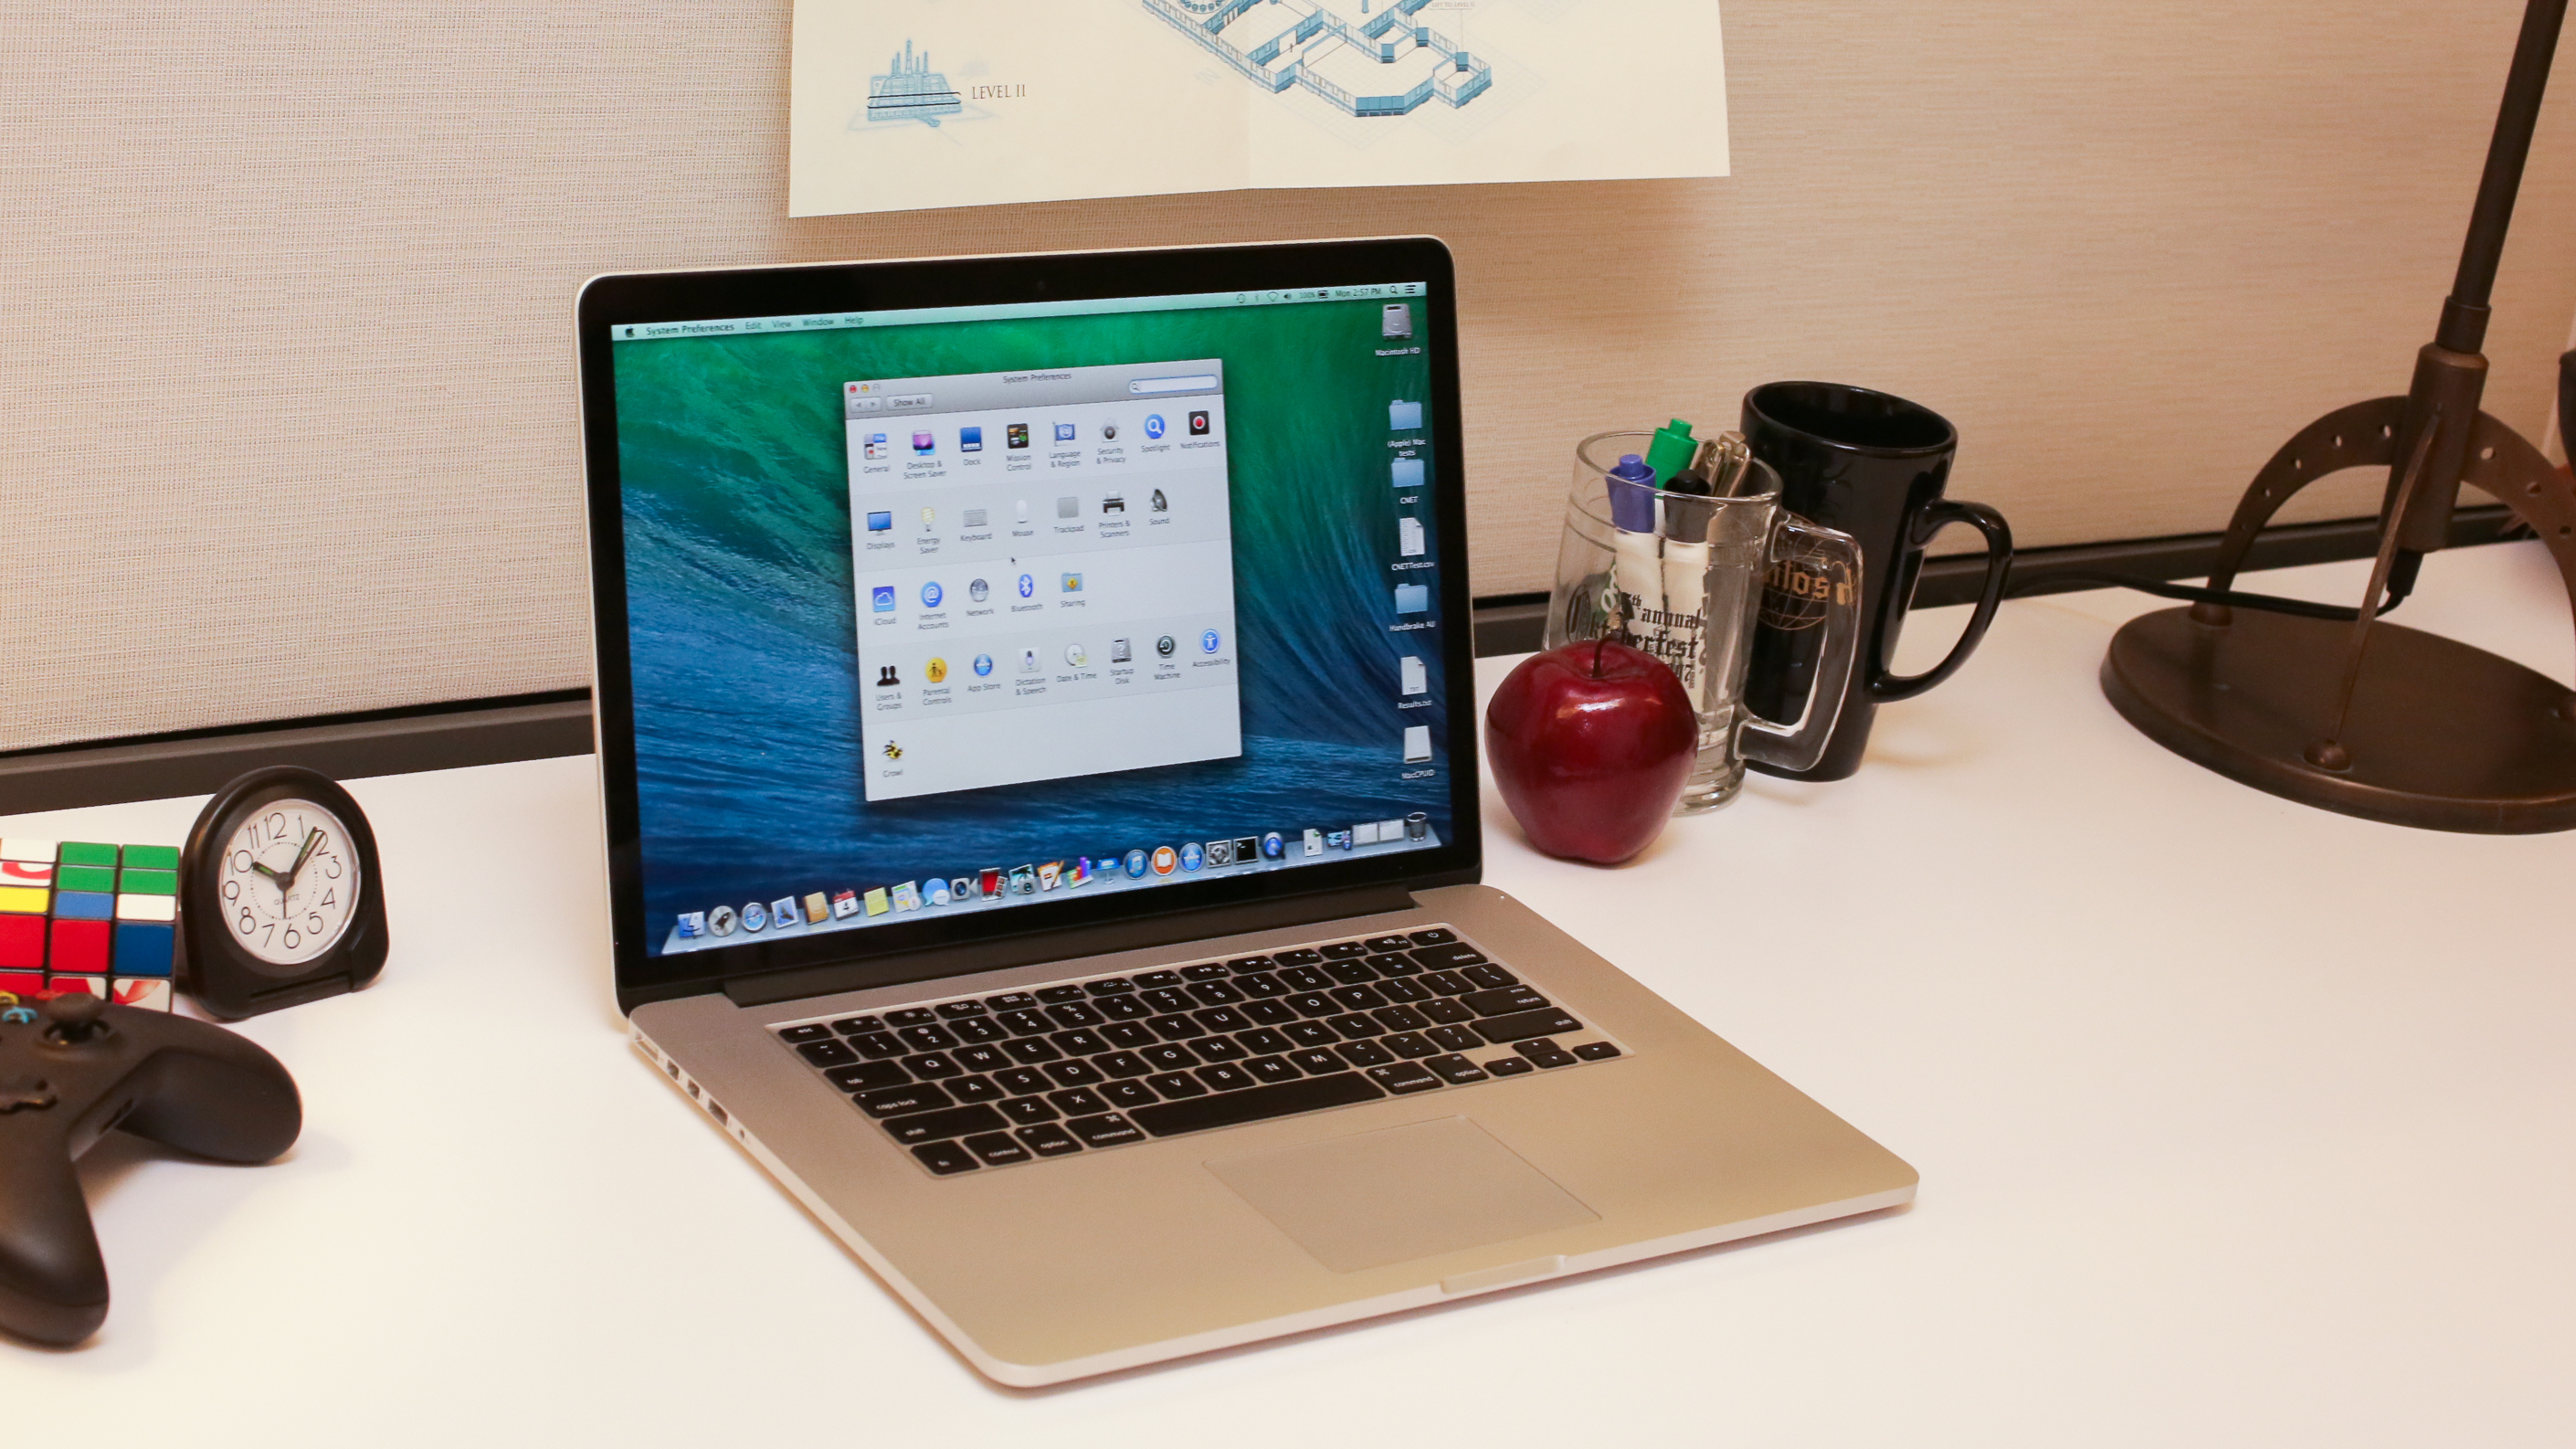 apple-macbook-pro-with-retina-display-15-inch-july-2014-product-photos12.jpg